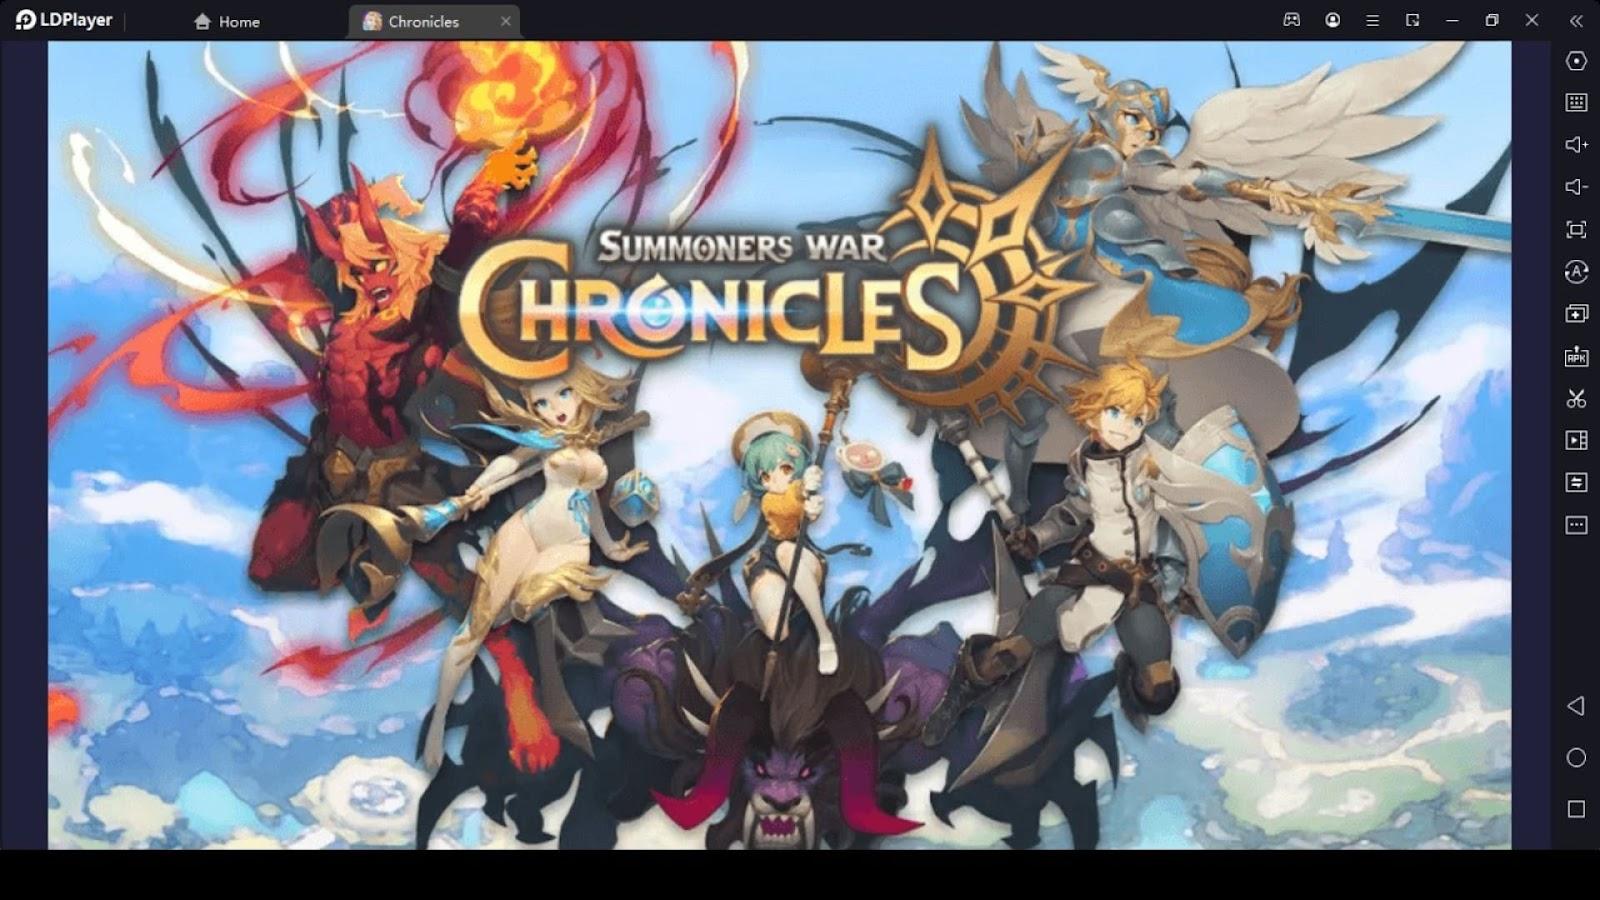 Summoners War Chronicles Tier List to Find Your Best Champ December